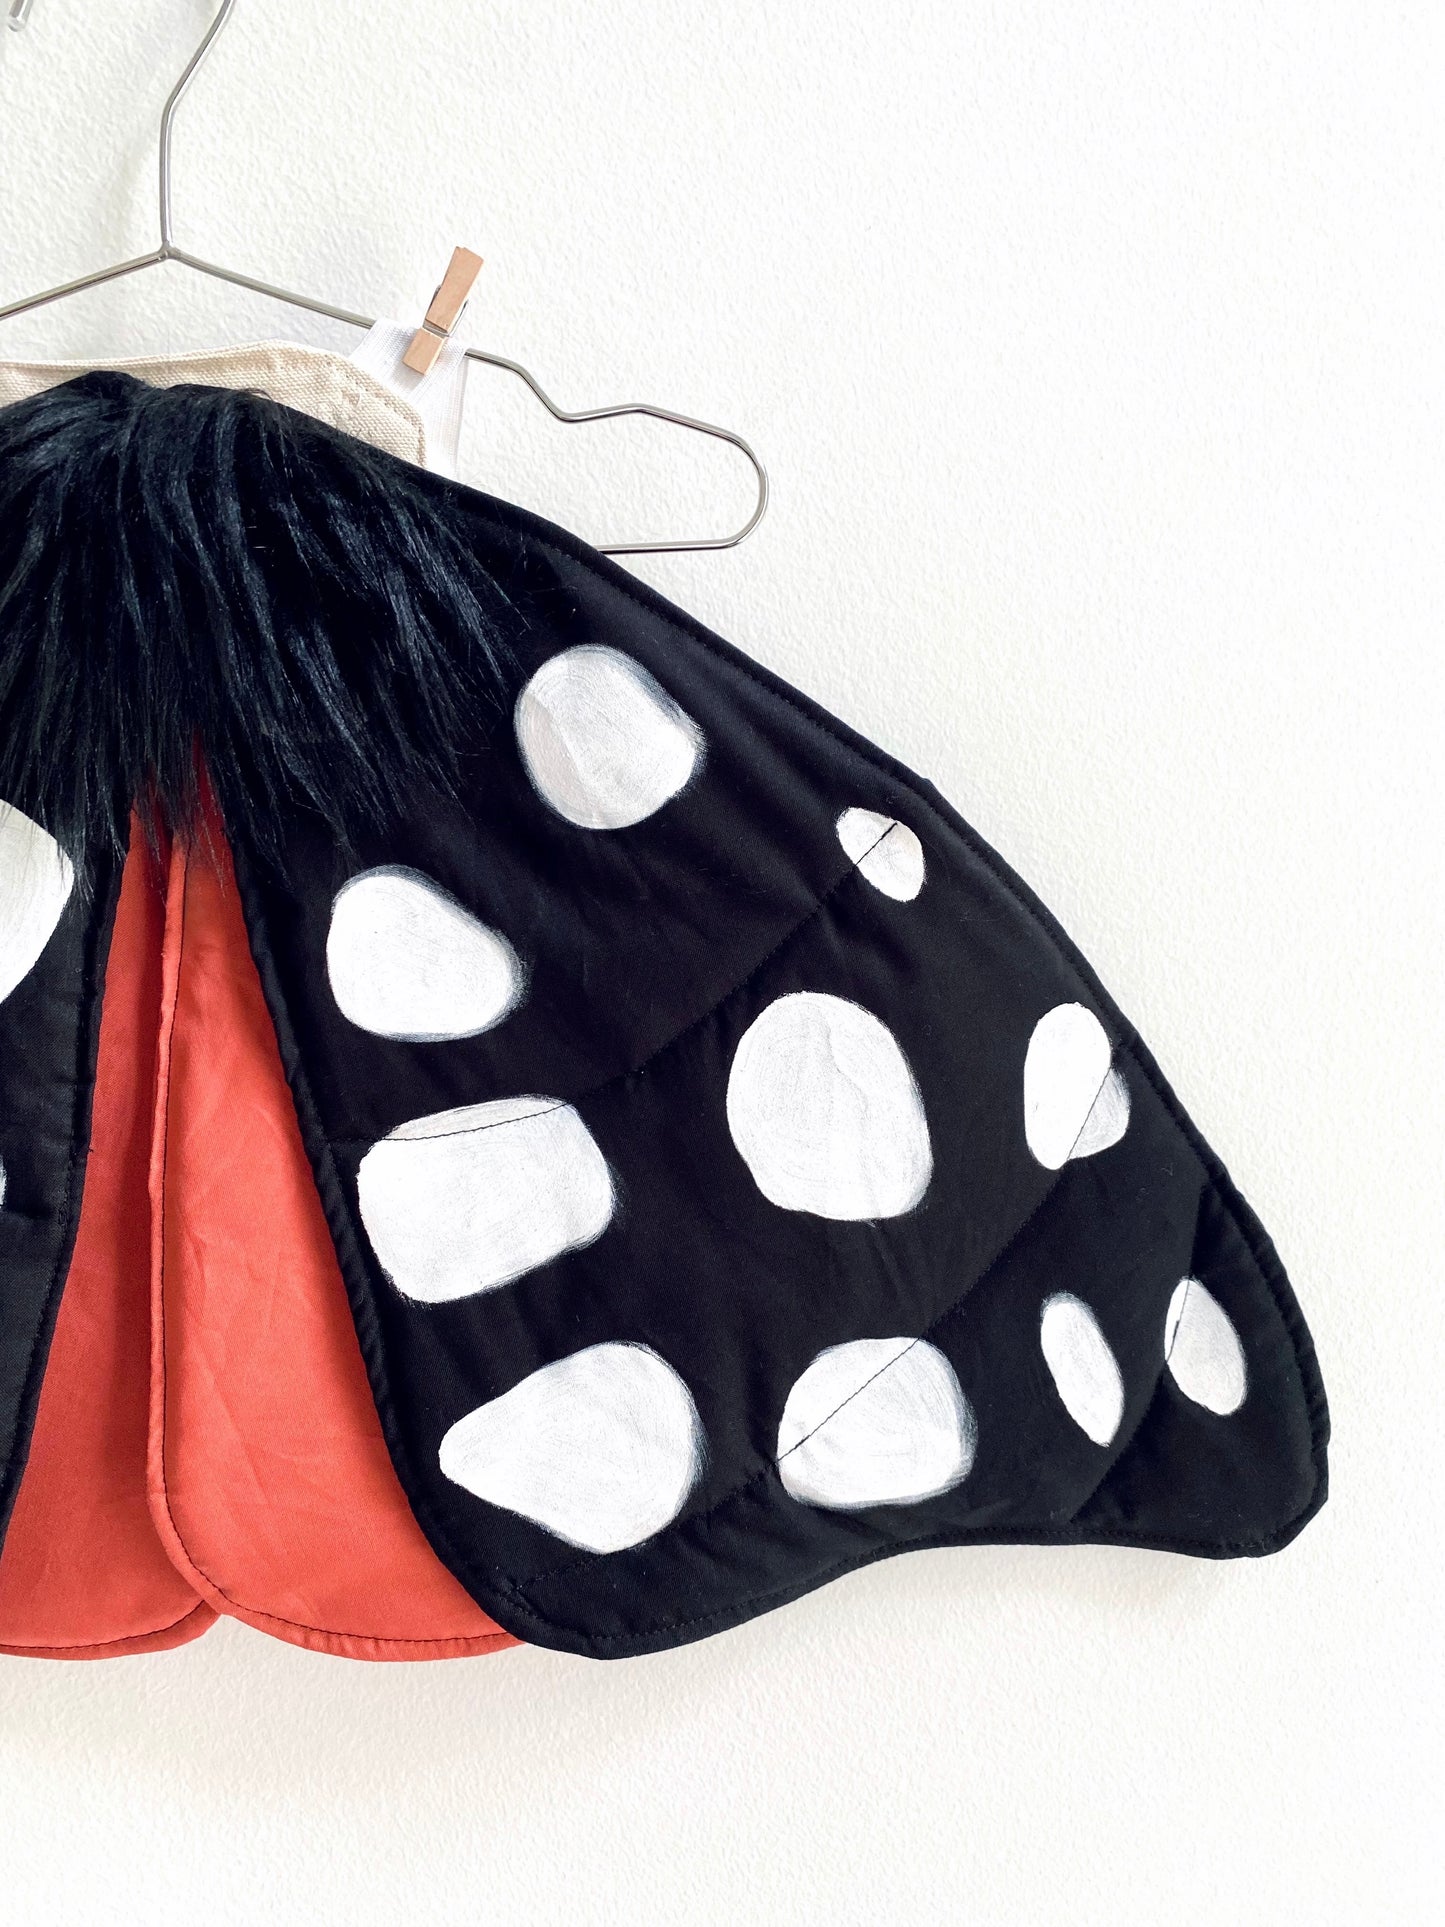 Spotted black moth costume wings for kids.